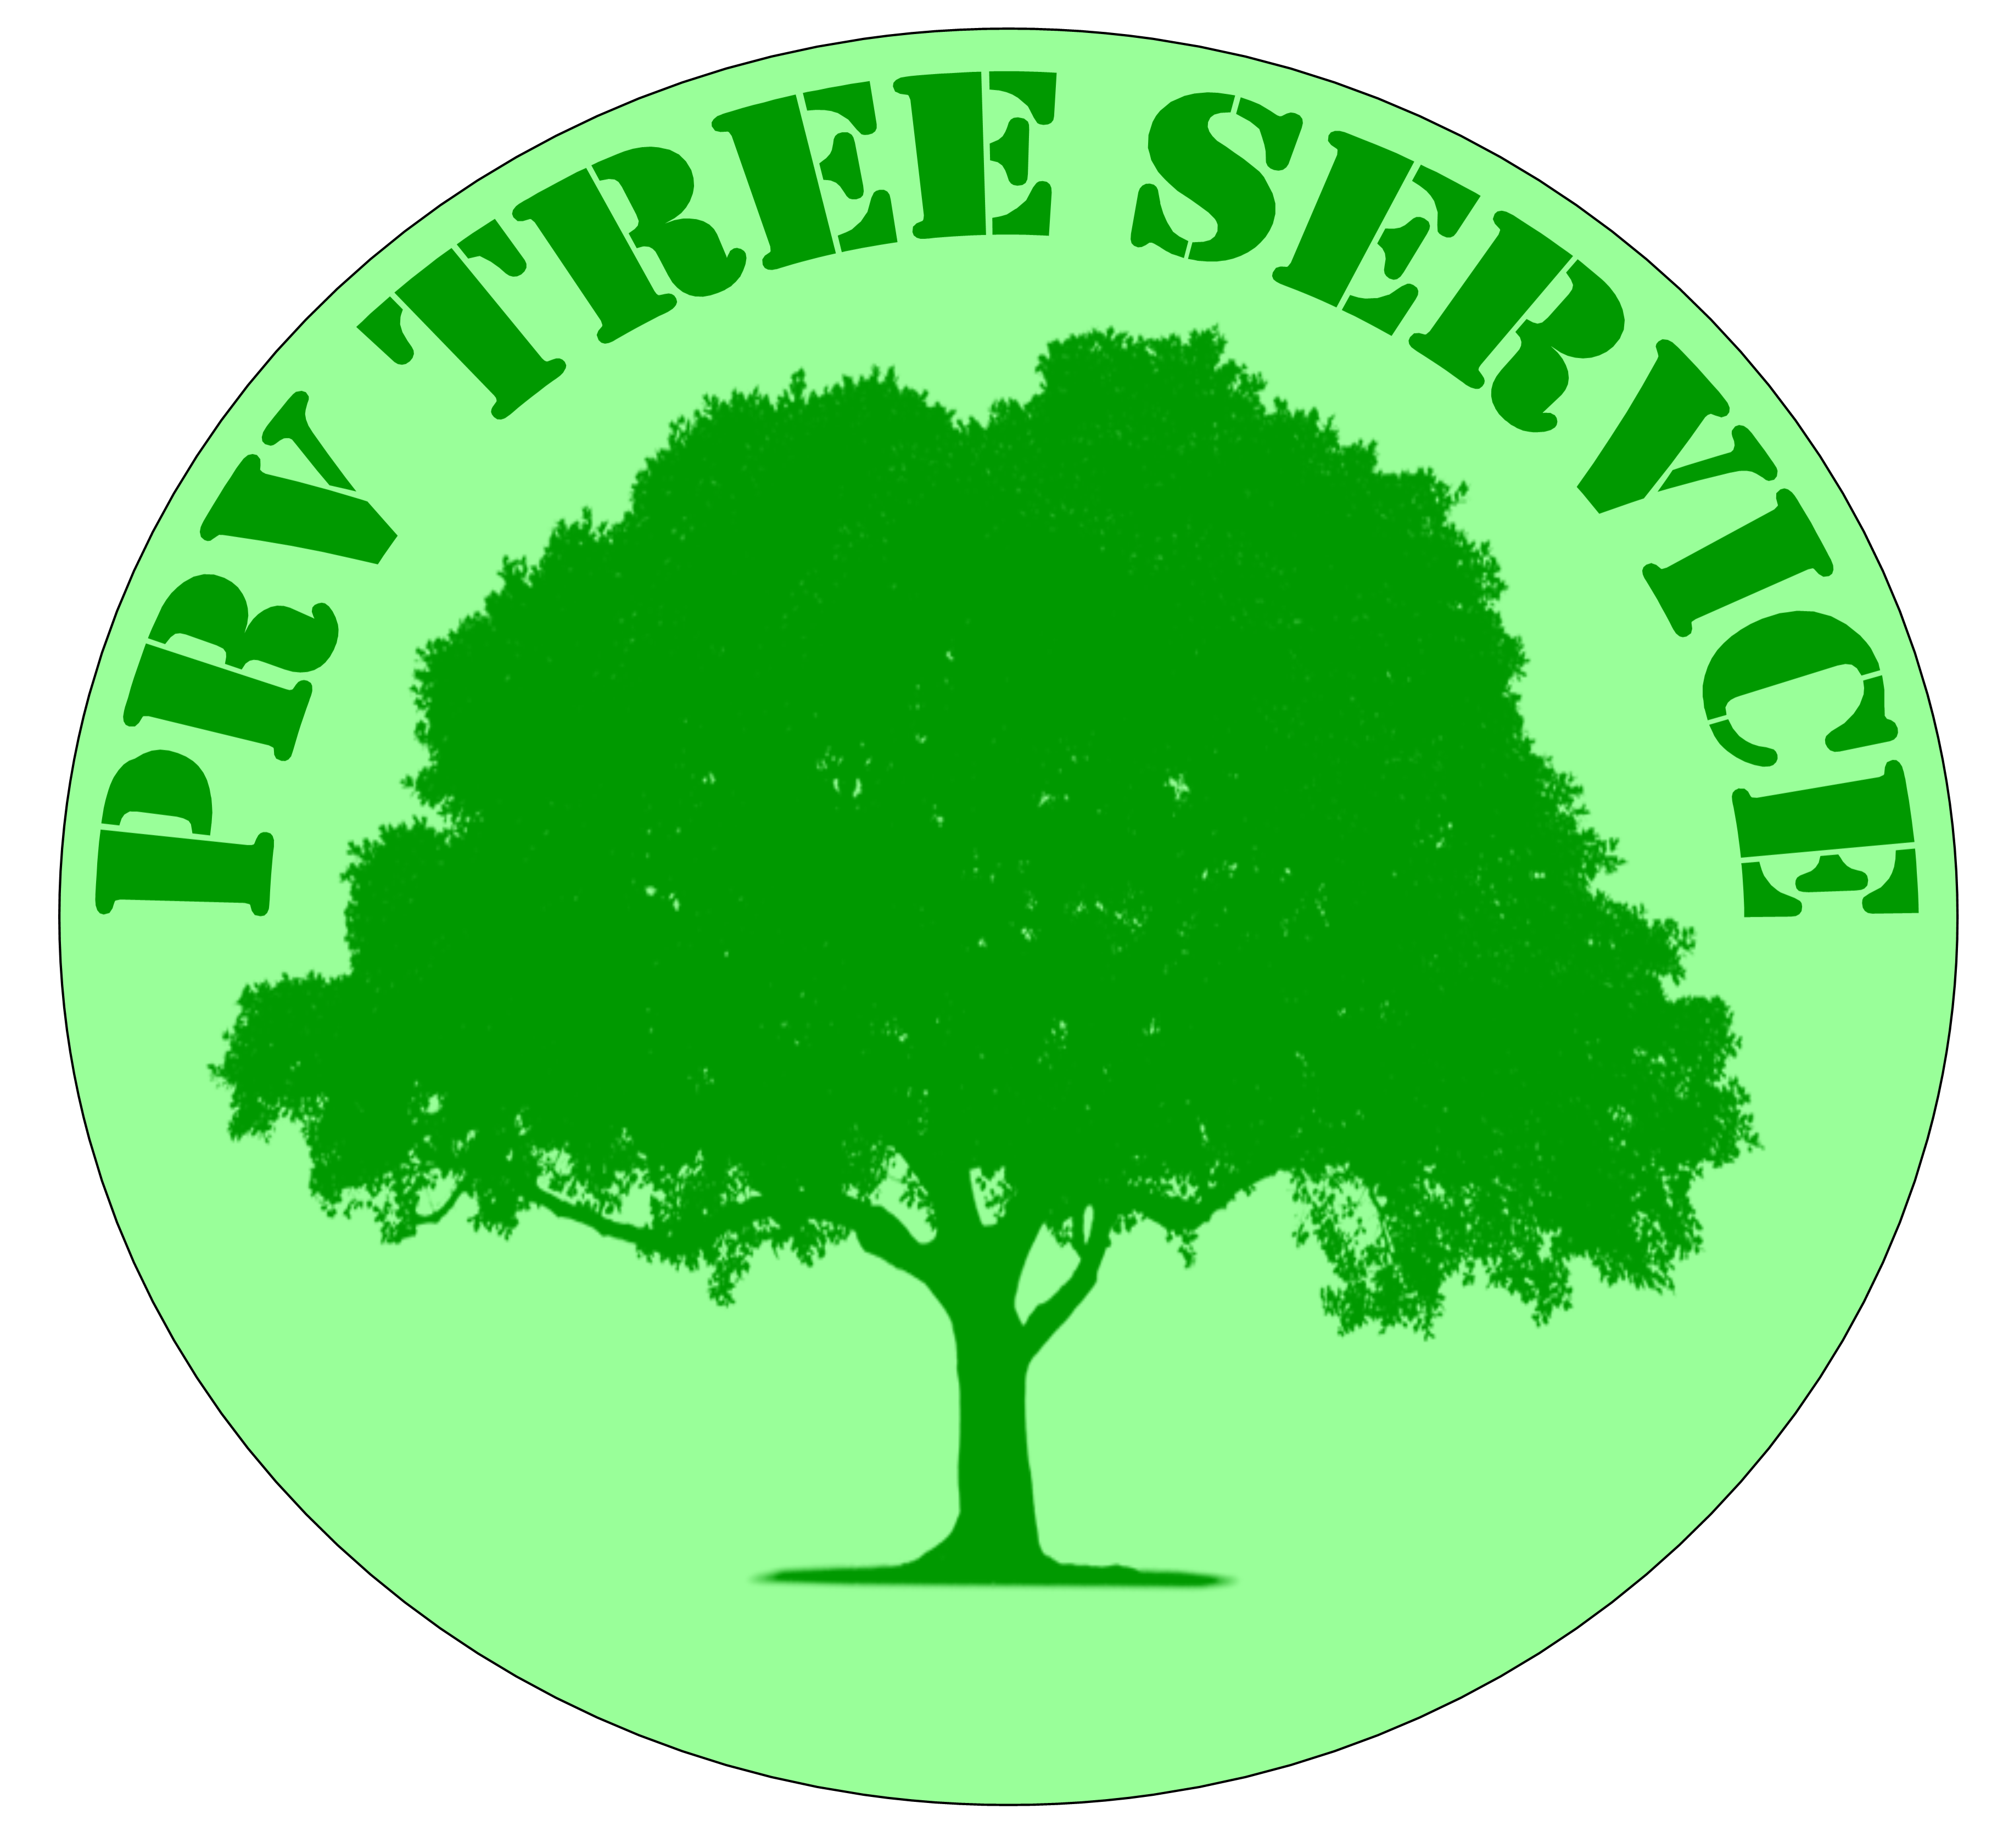 Landscaping clipart hedge cutting. Trimming service prv tree